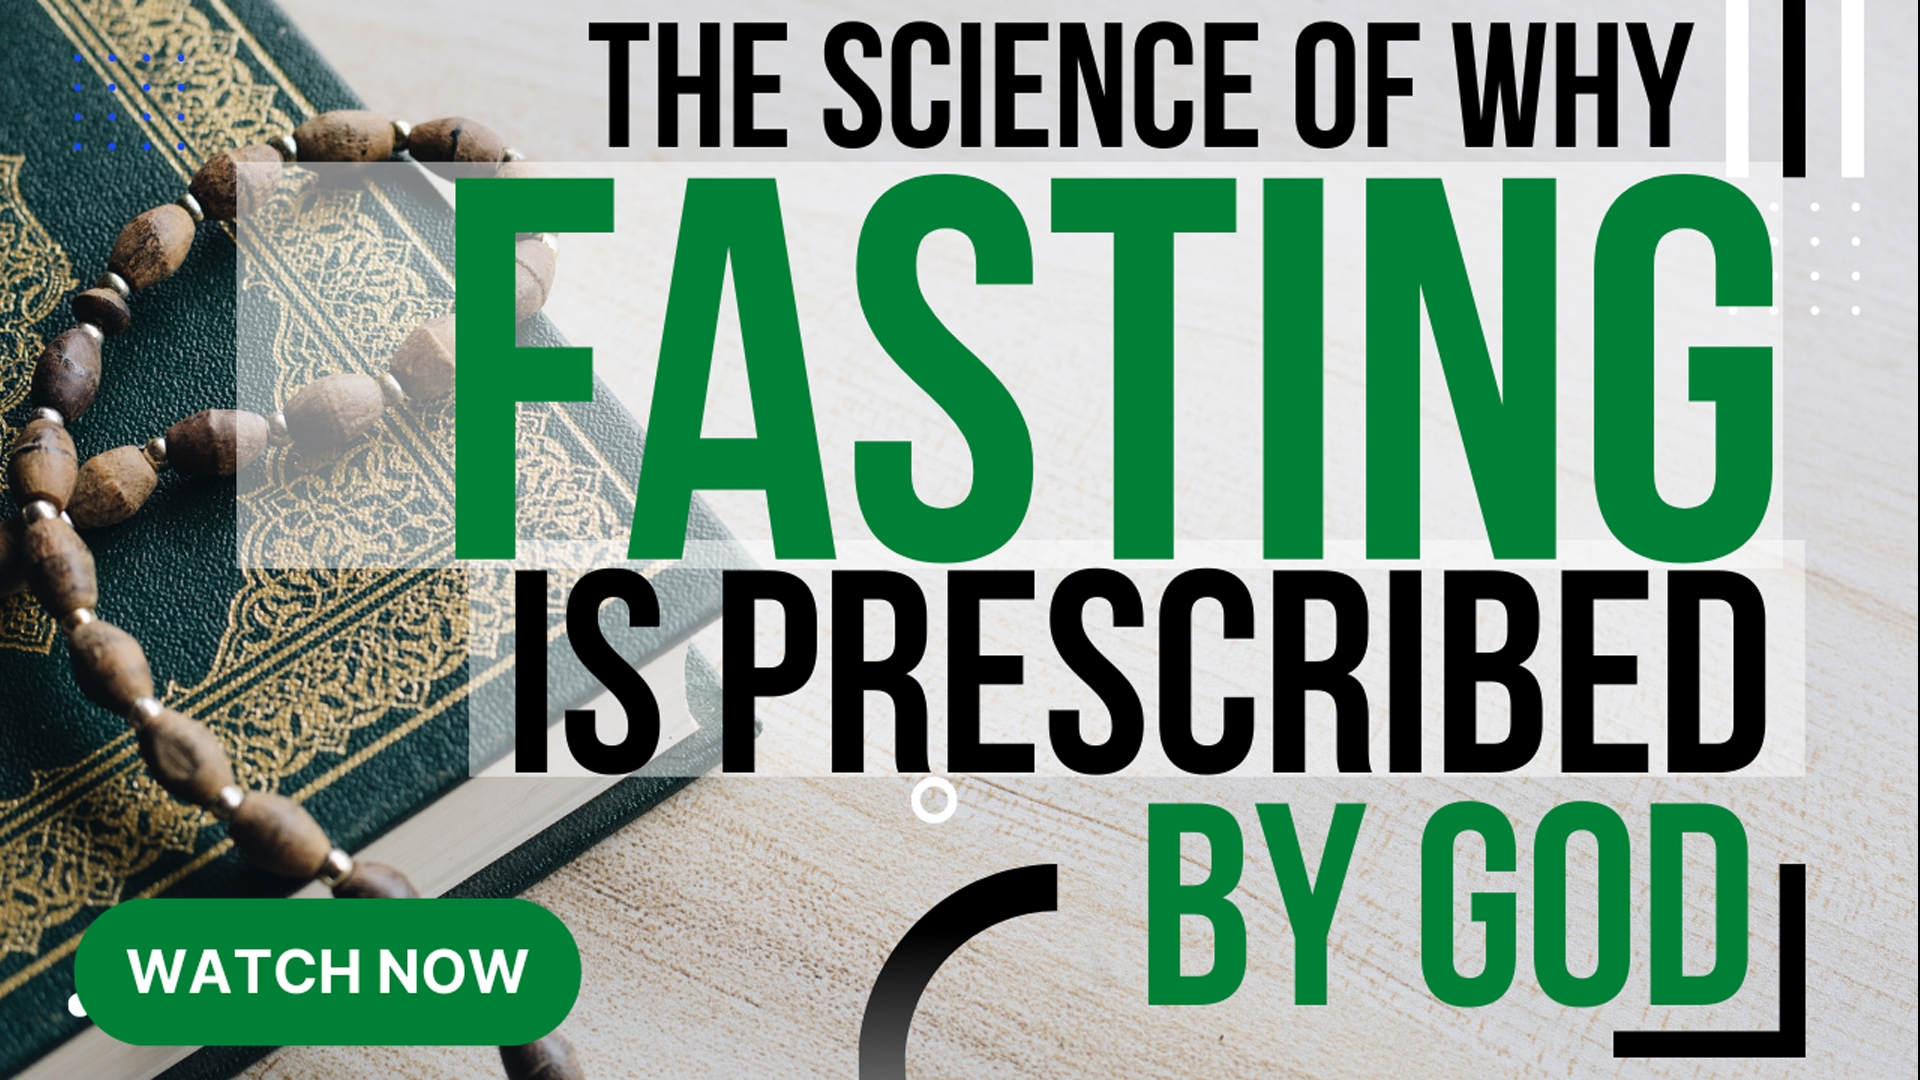 The Science of Why Fasting is Prescribed by God